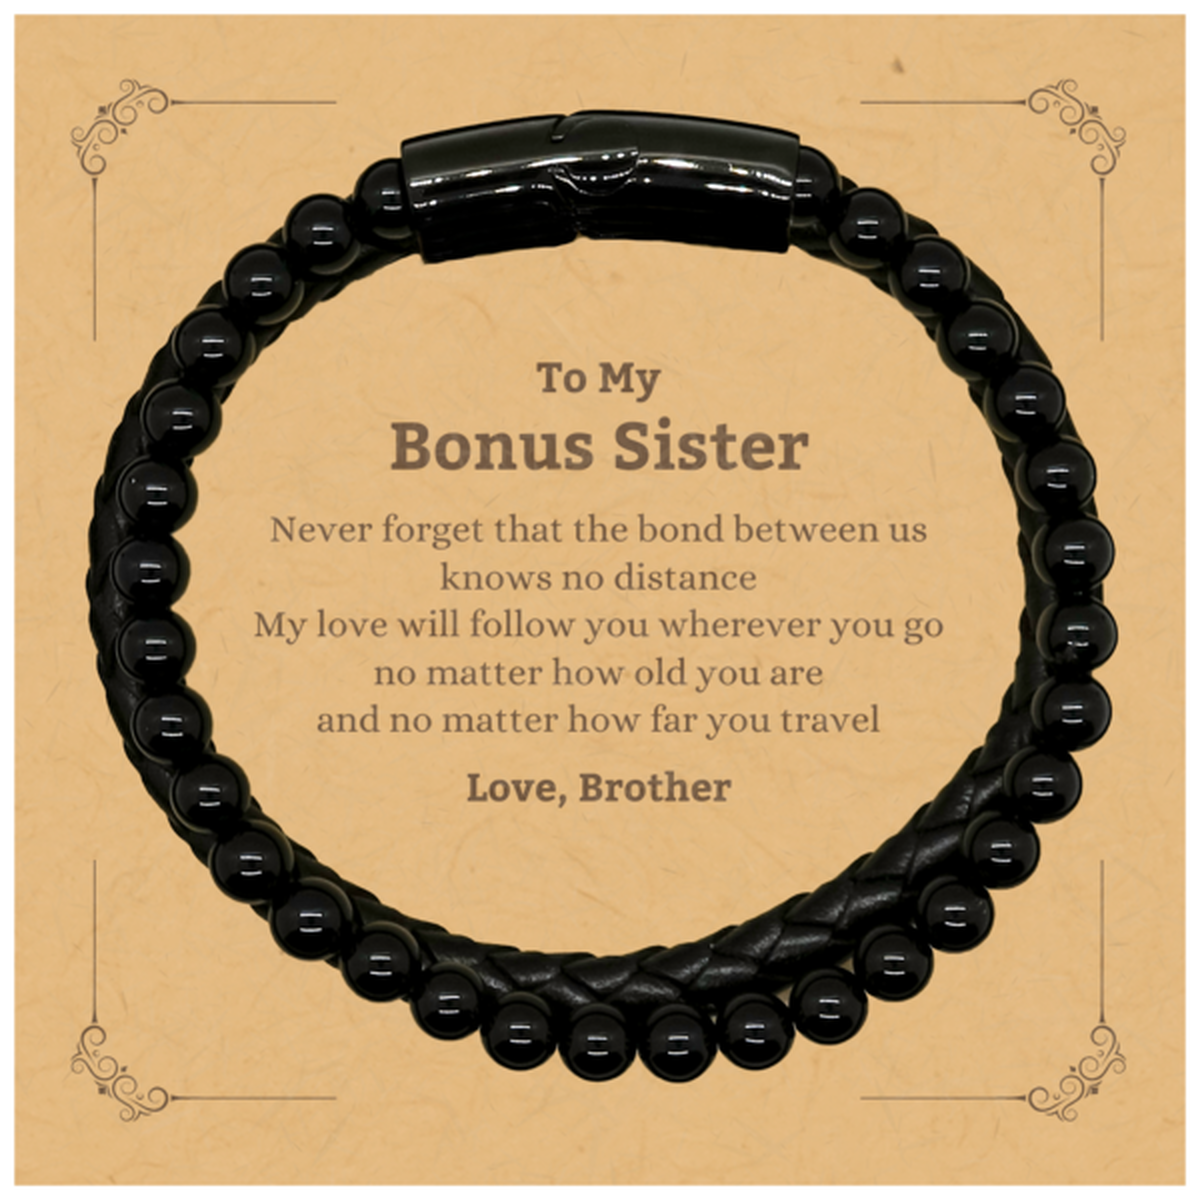 Bonus Sister Birthday Gifts from Brother, Adjustable Stone Leather Bracelets for Bonus Sister Christmas Graduation Unique Gifts Bonus Sister Never forget that the bond between us knows no distance. Love, Brother